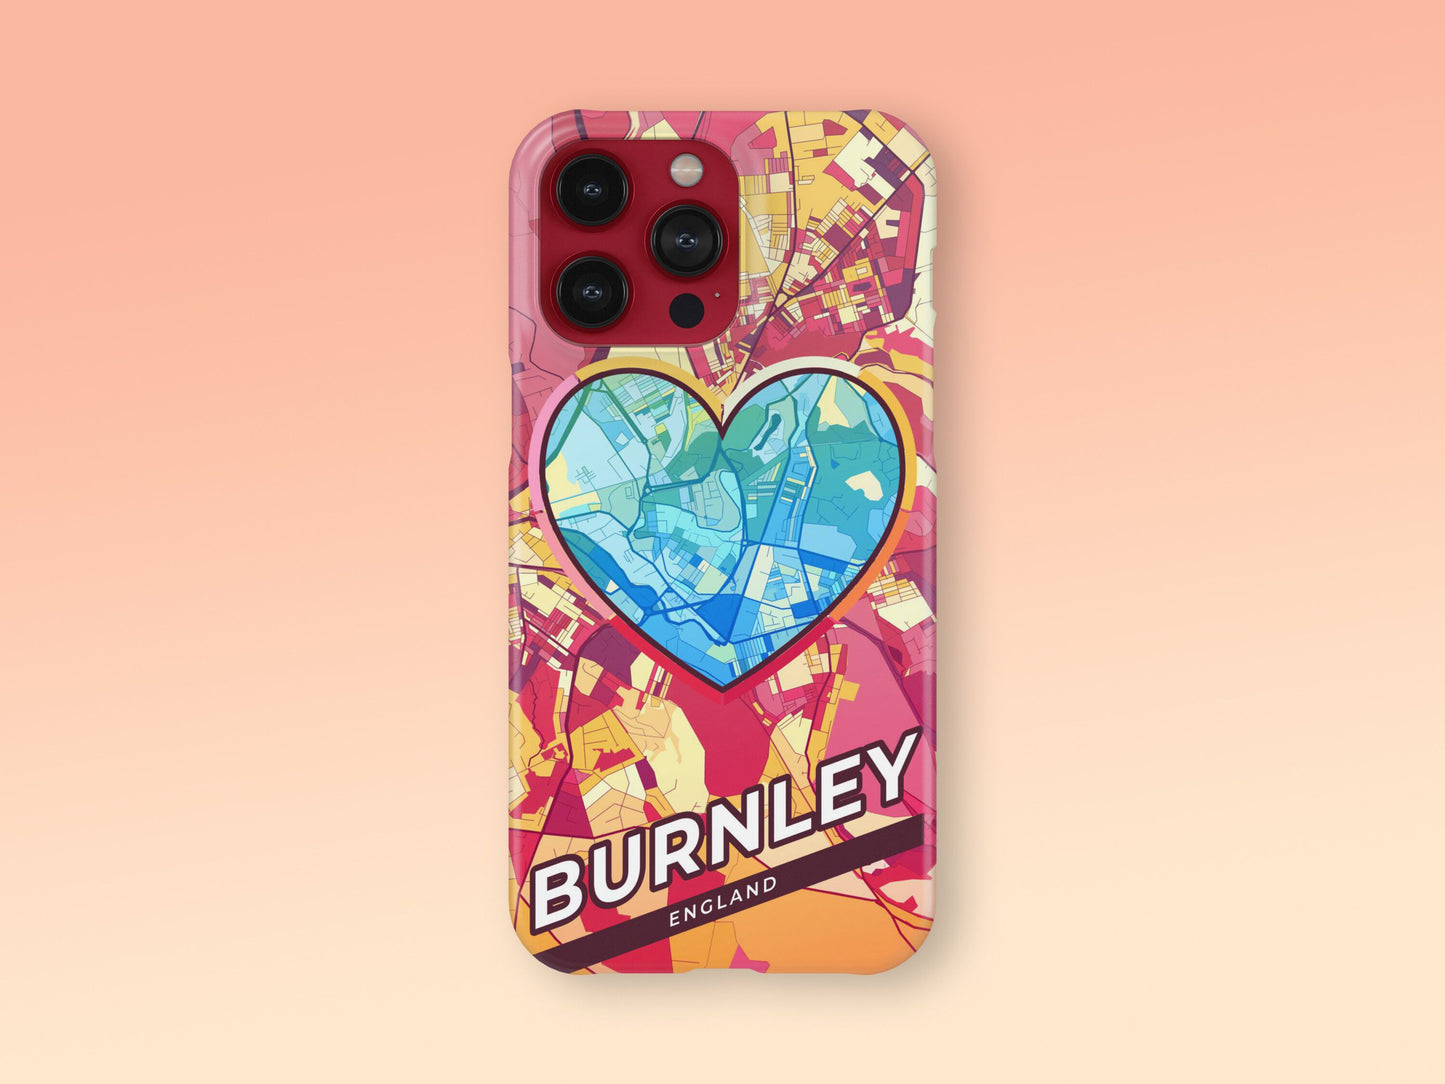 Burnley England slim phone case with colorful icon. Birthday, wedding or housewarming gift. Couple match cases. 2